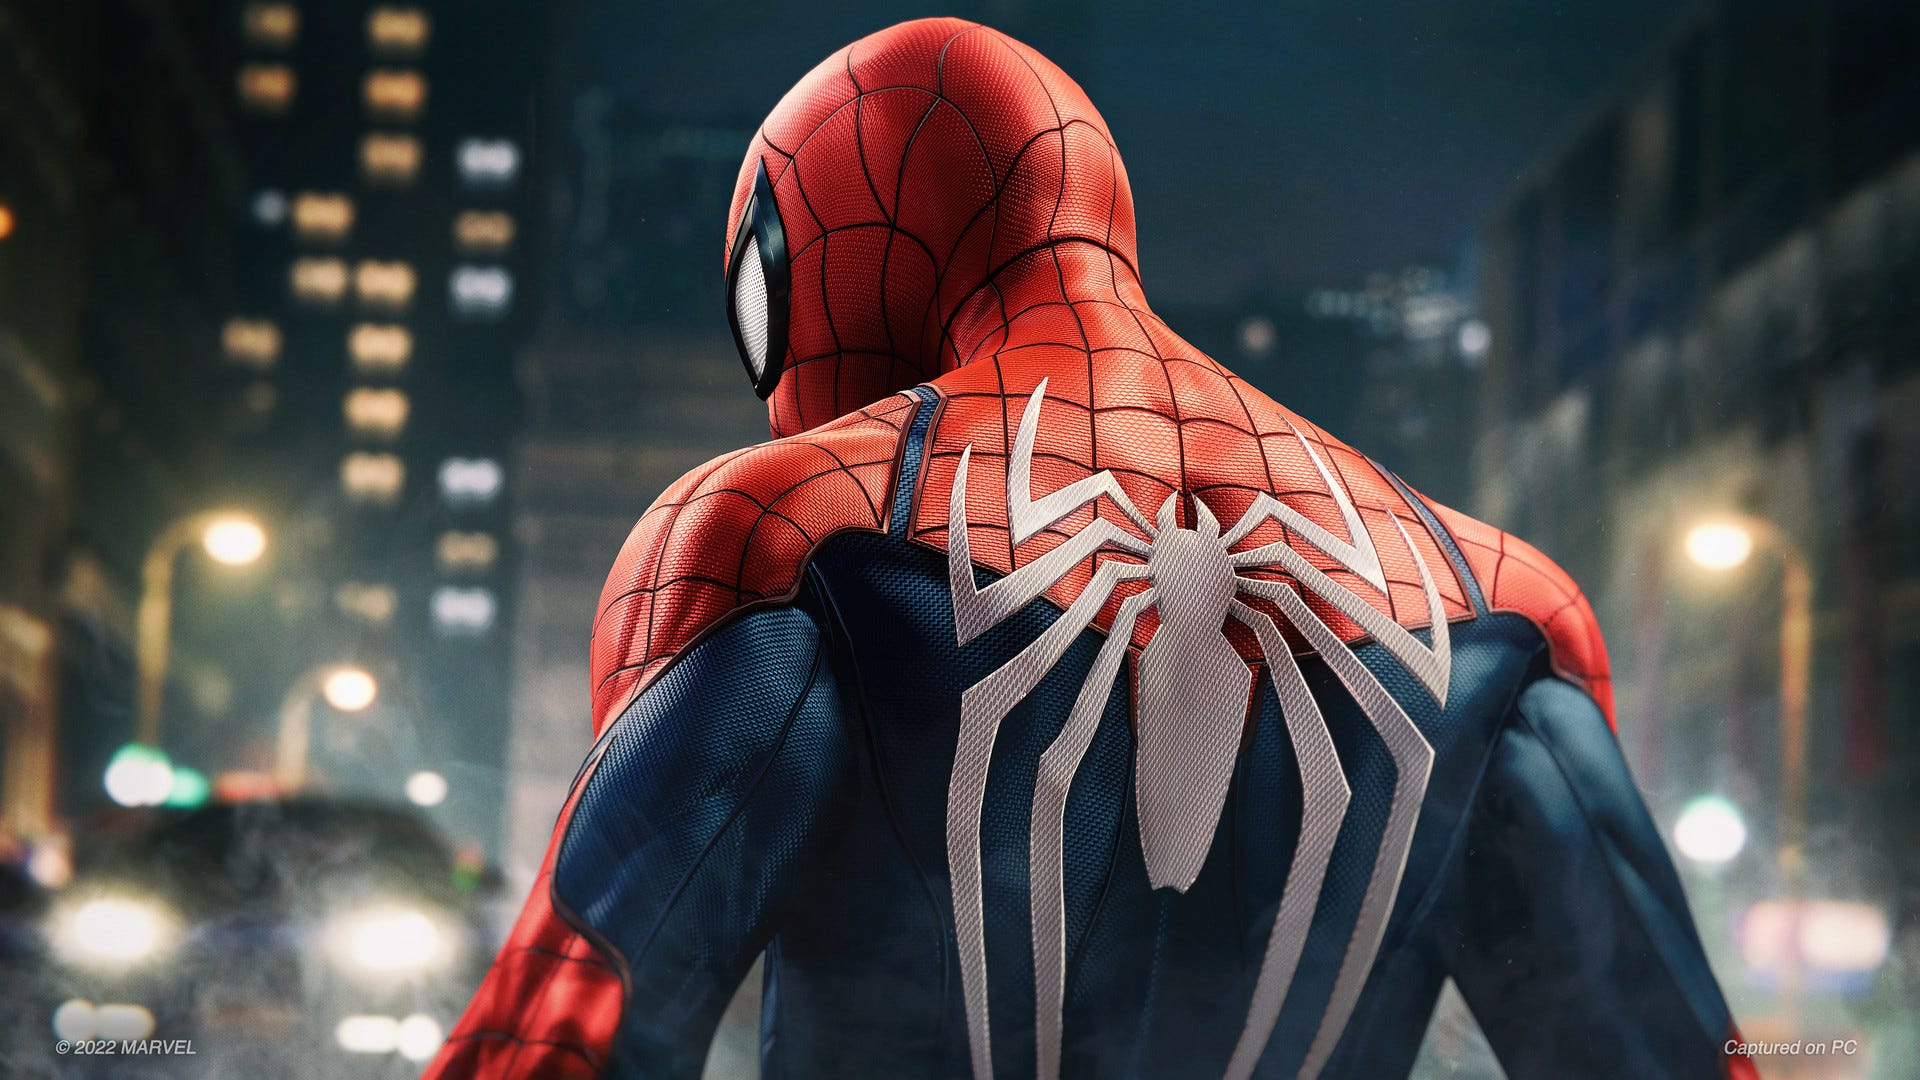 Spider-Man PS4 Gameplay Debuts